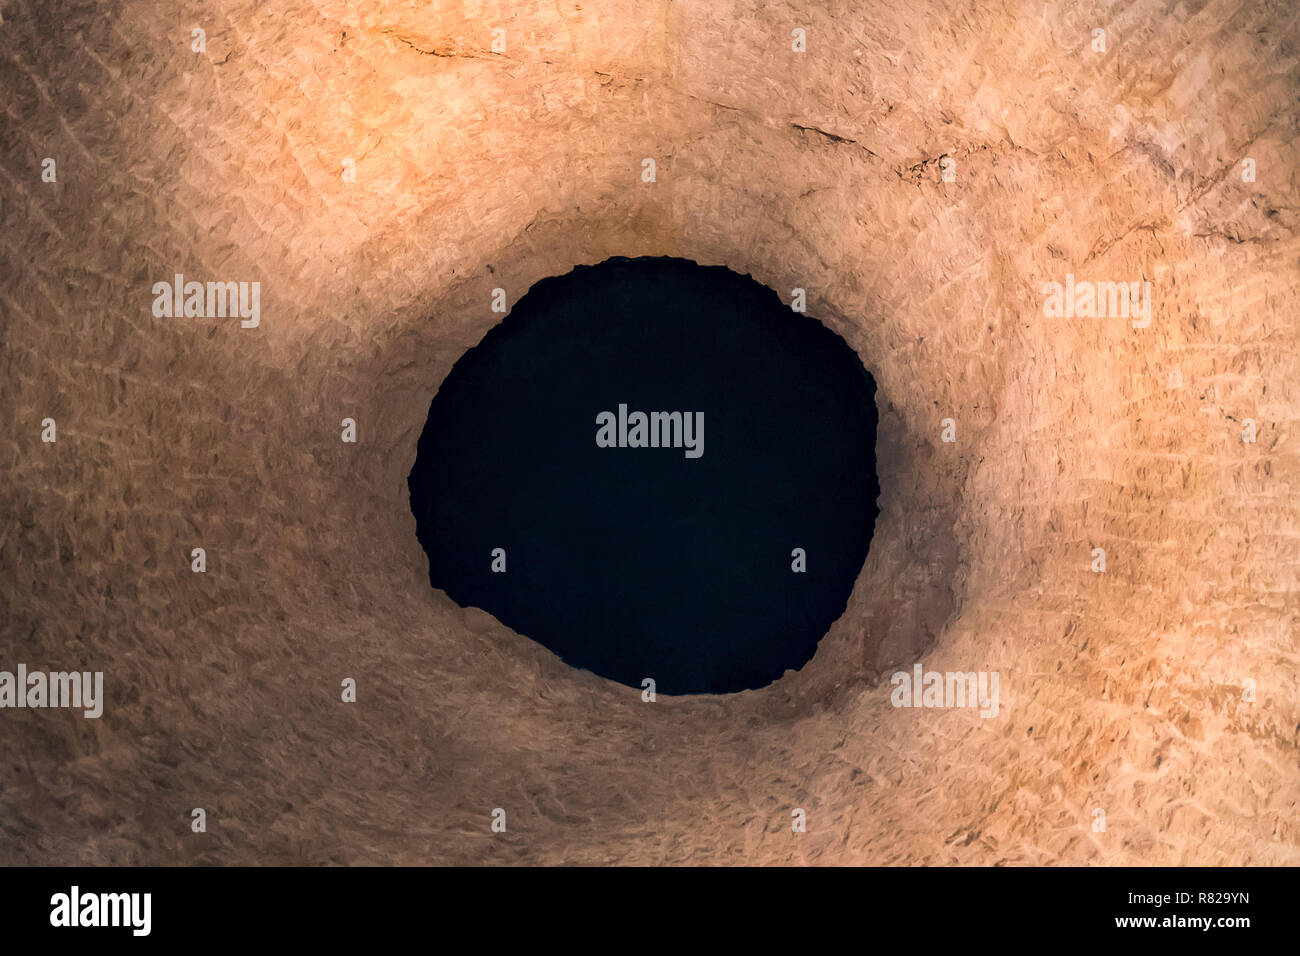 A black hole in a rock crevice. Abstraction Stock Photo